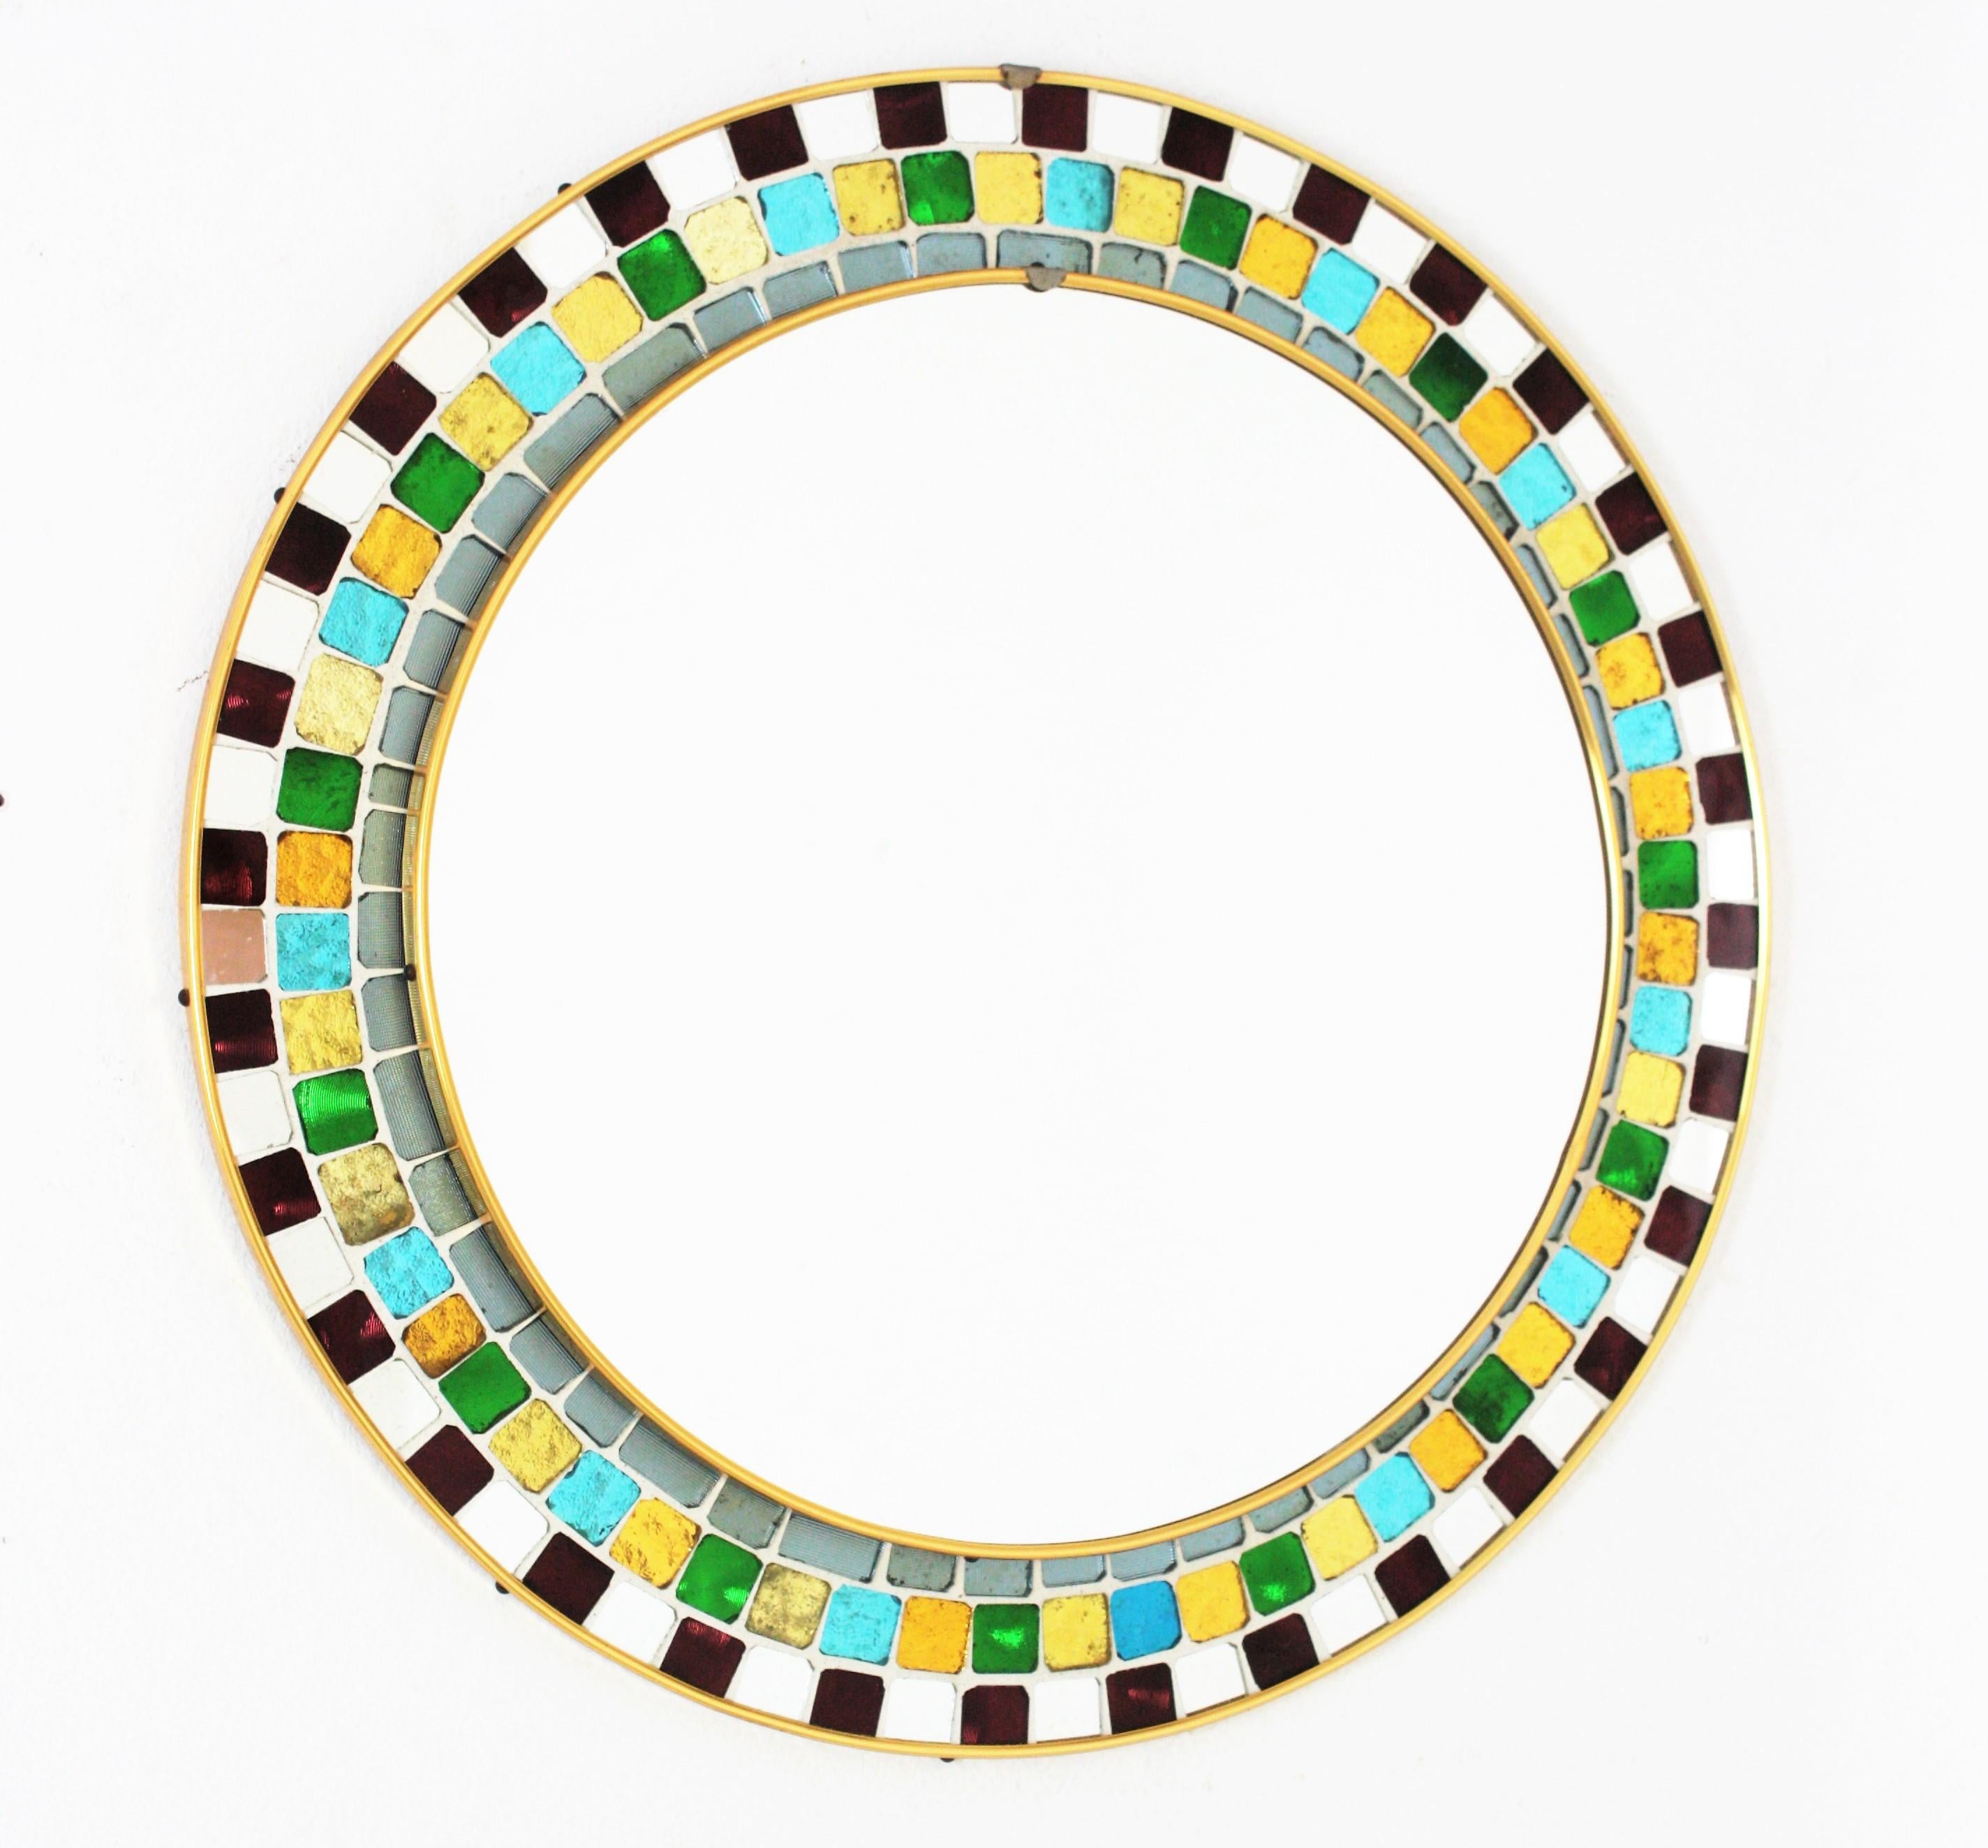 Spanish midcentury mosaic round mirror framed with multicolor glass tiles. Spain, 1960s.
This gorgeous Mid-Century Modern mirror features a tile mosaic with small pieces of textured irisdiscent glass in different colors color cased on a white